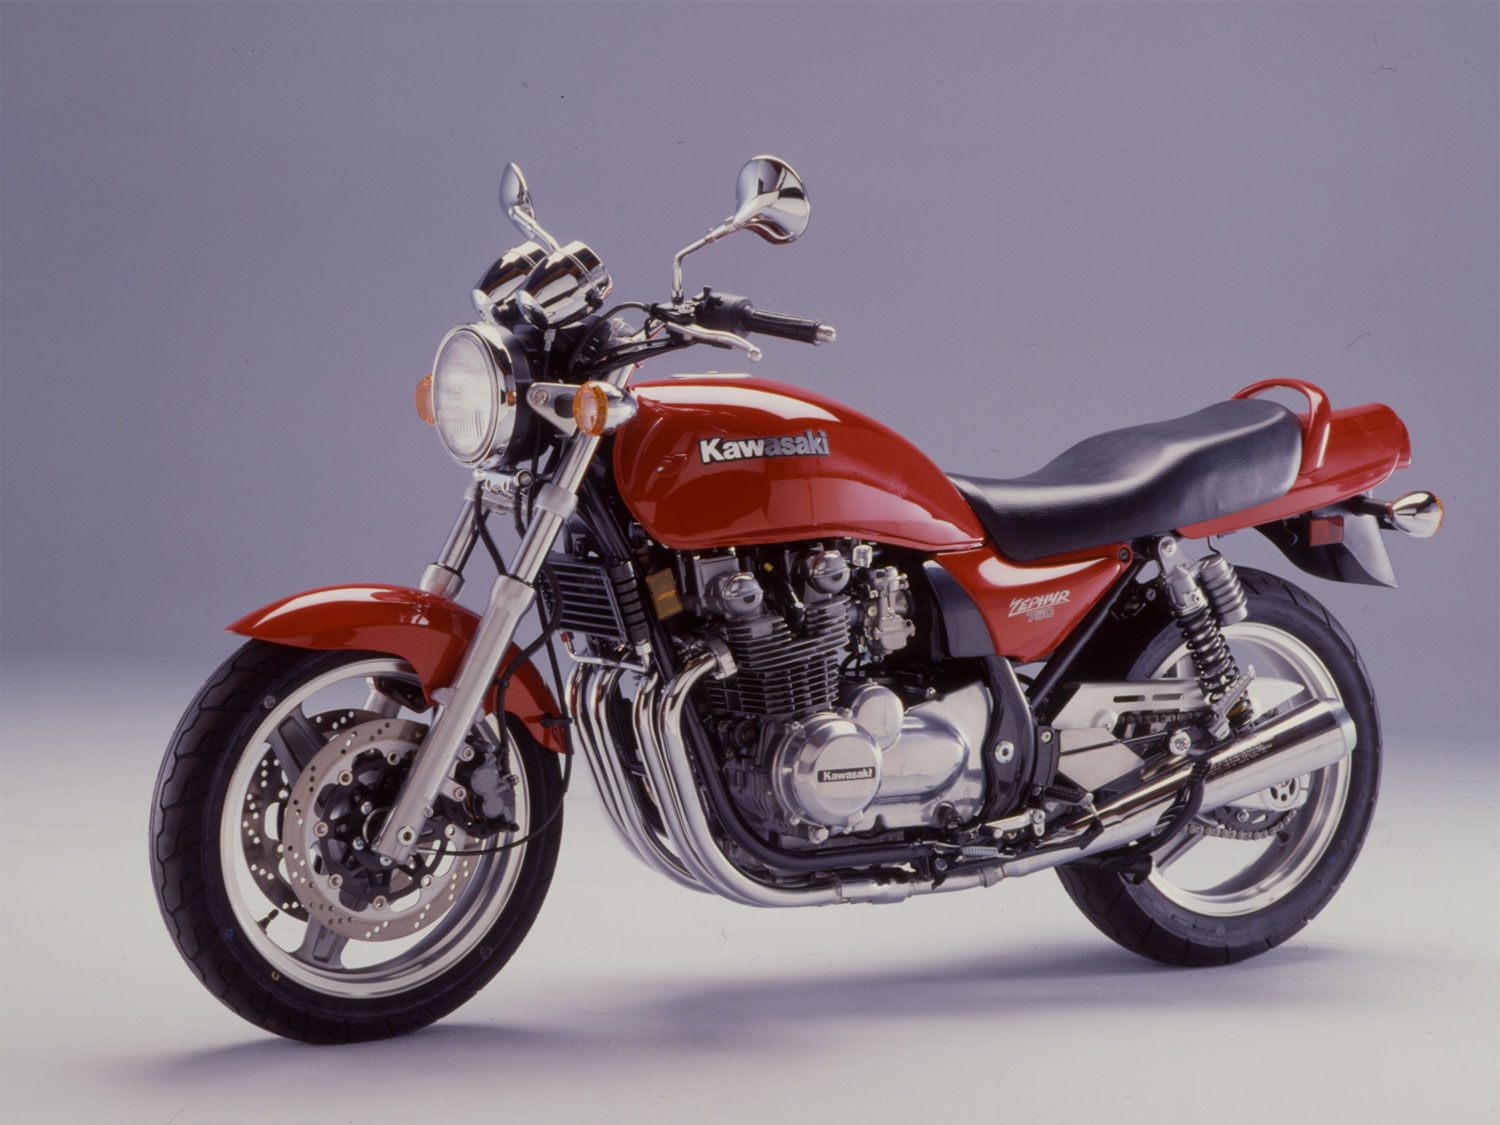 Focusing In On The Kawasaki Zephyr To Find Out If It Was The Ultimate 750